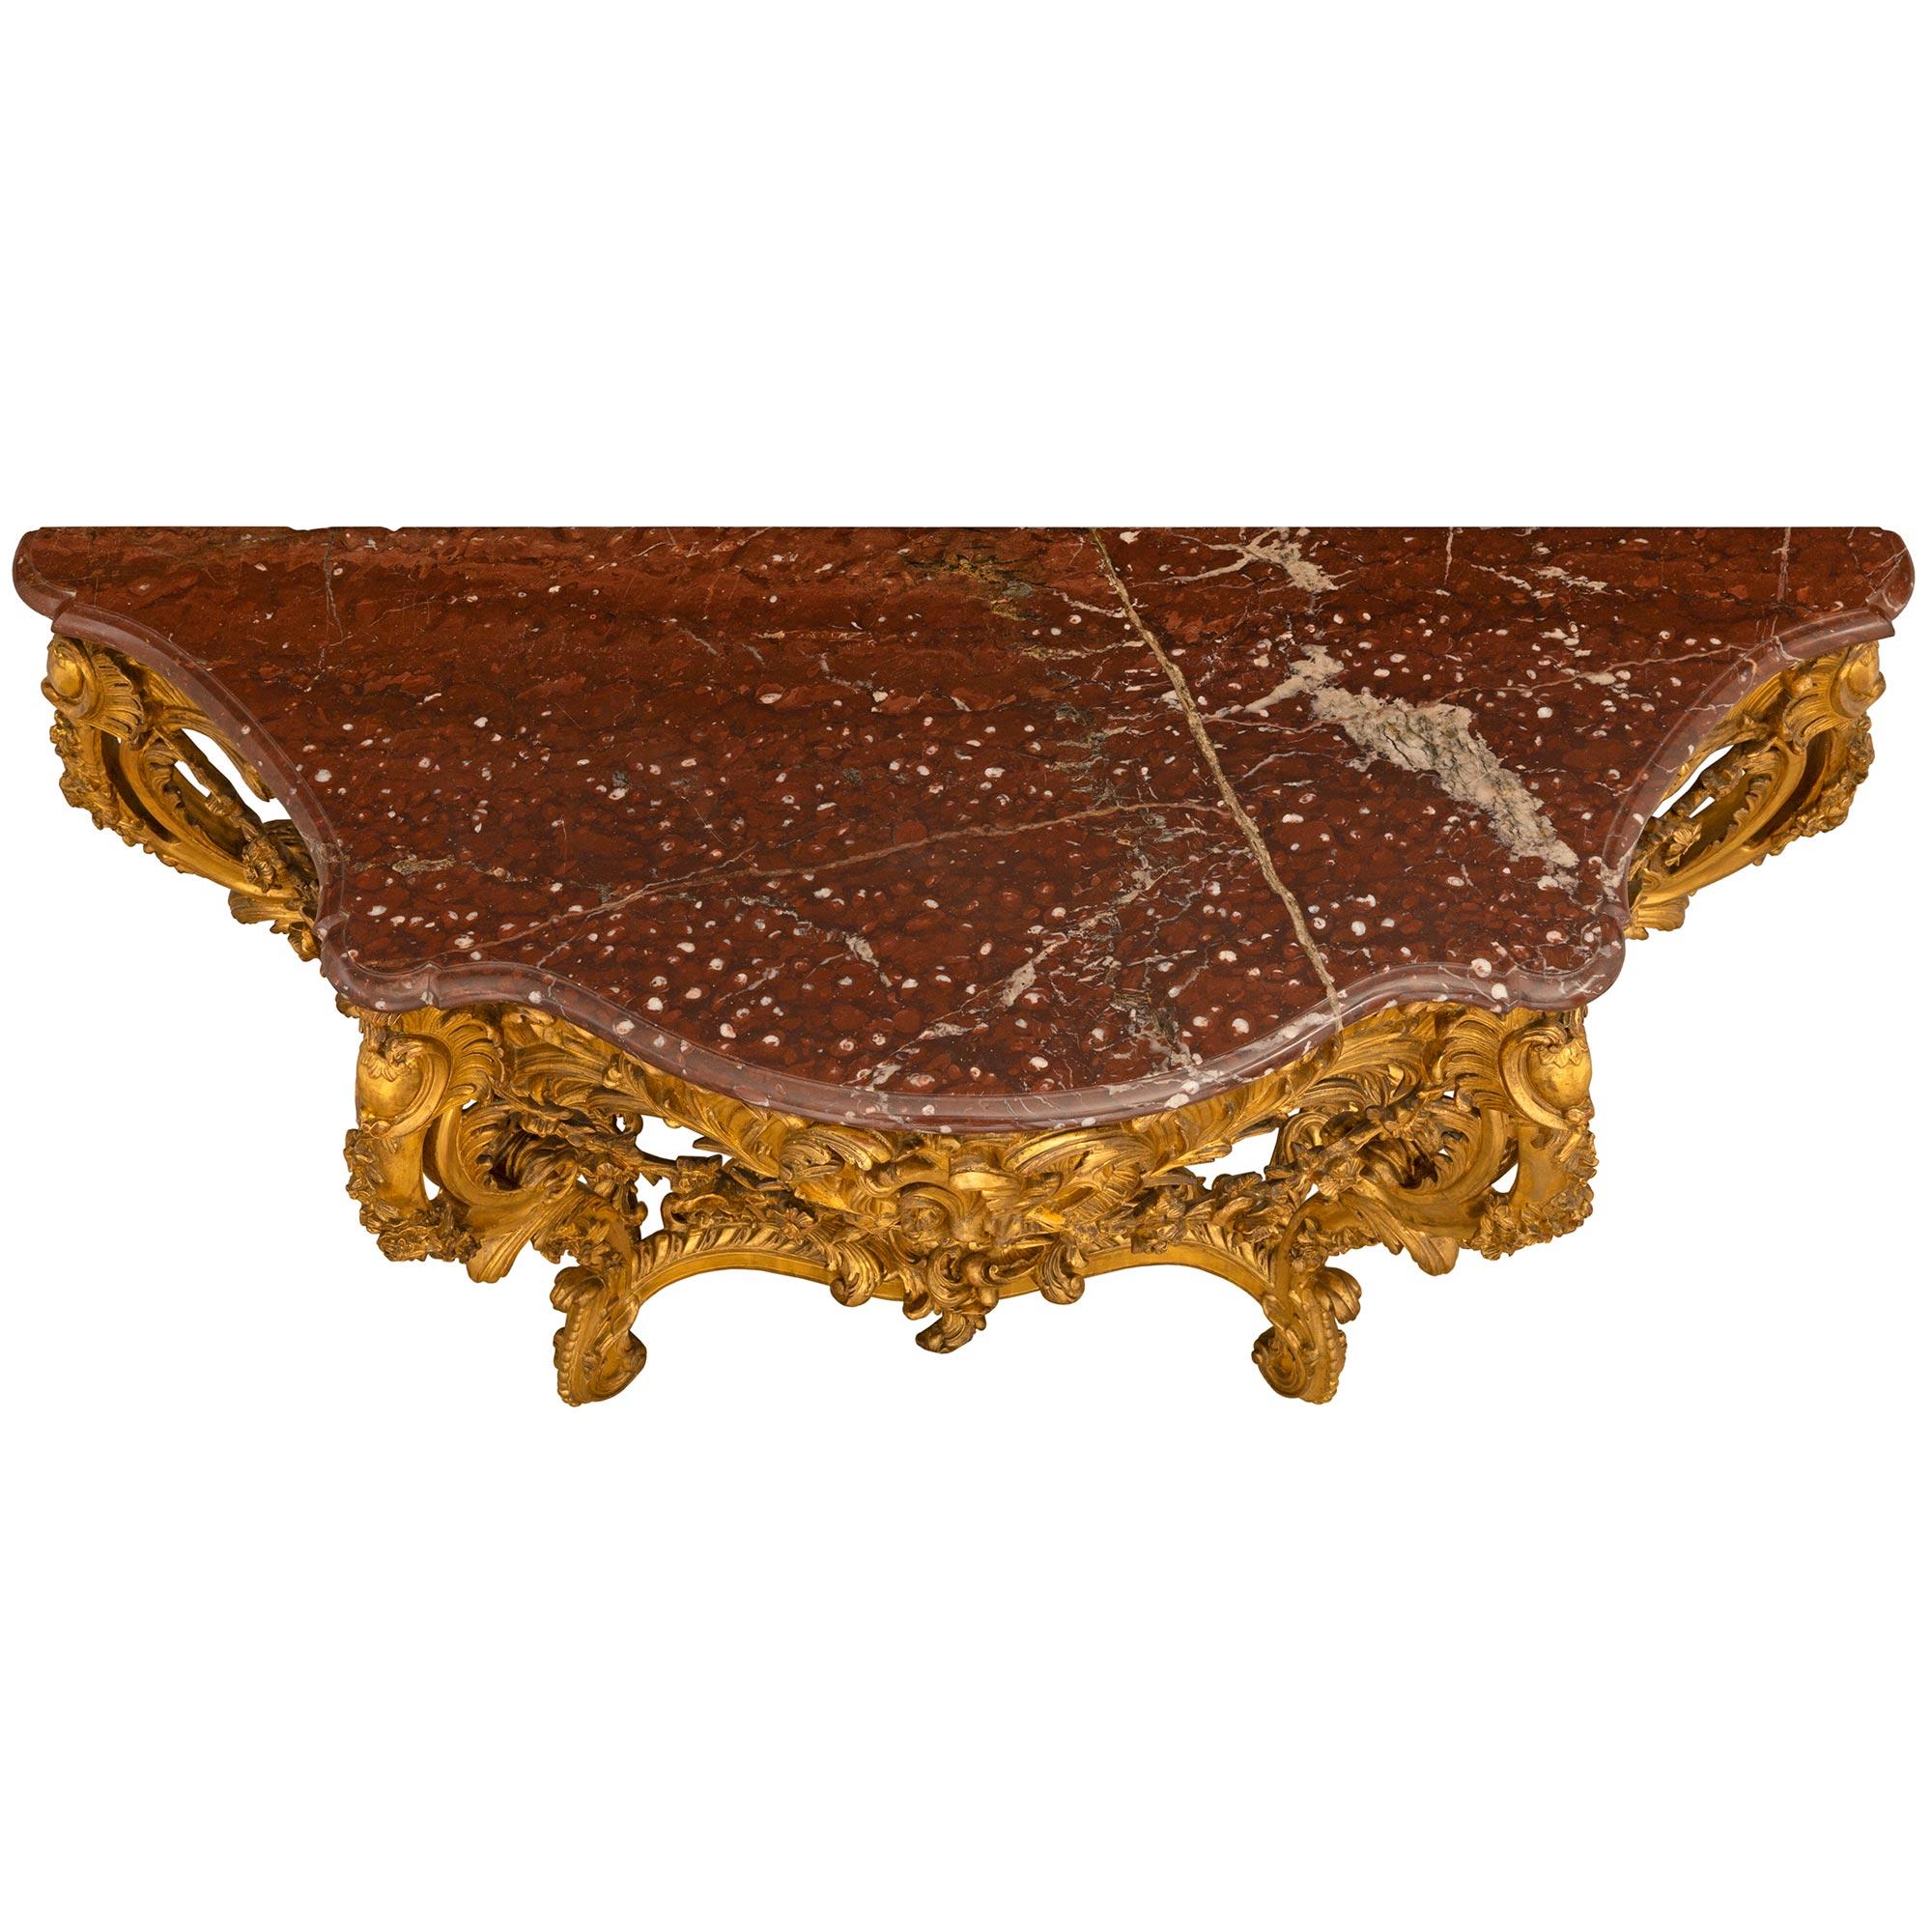 An impressive and extremely high quality French 19h century Louis XV st. giltwood freestanding console with the original marble top. The console is raise by sensational cabriole legs with exquisitely carved foliate movements, floral accents and a